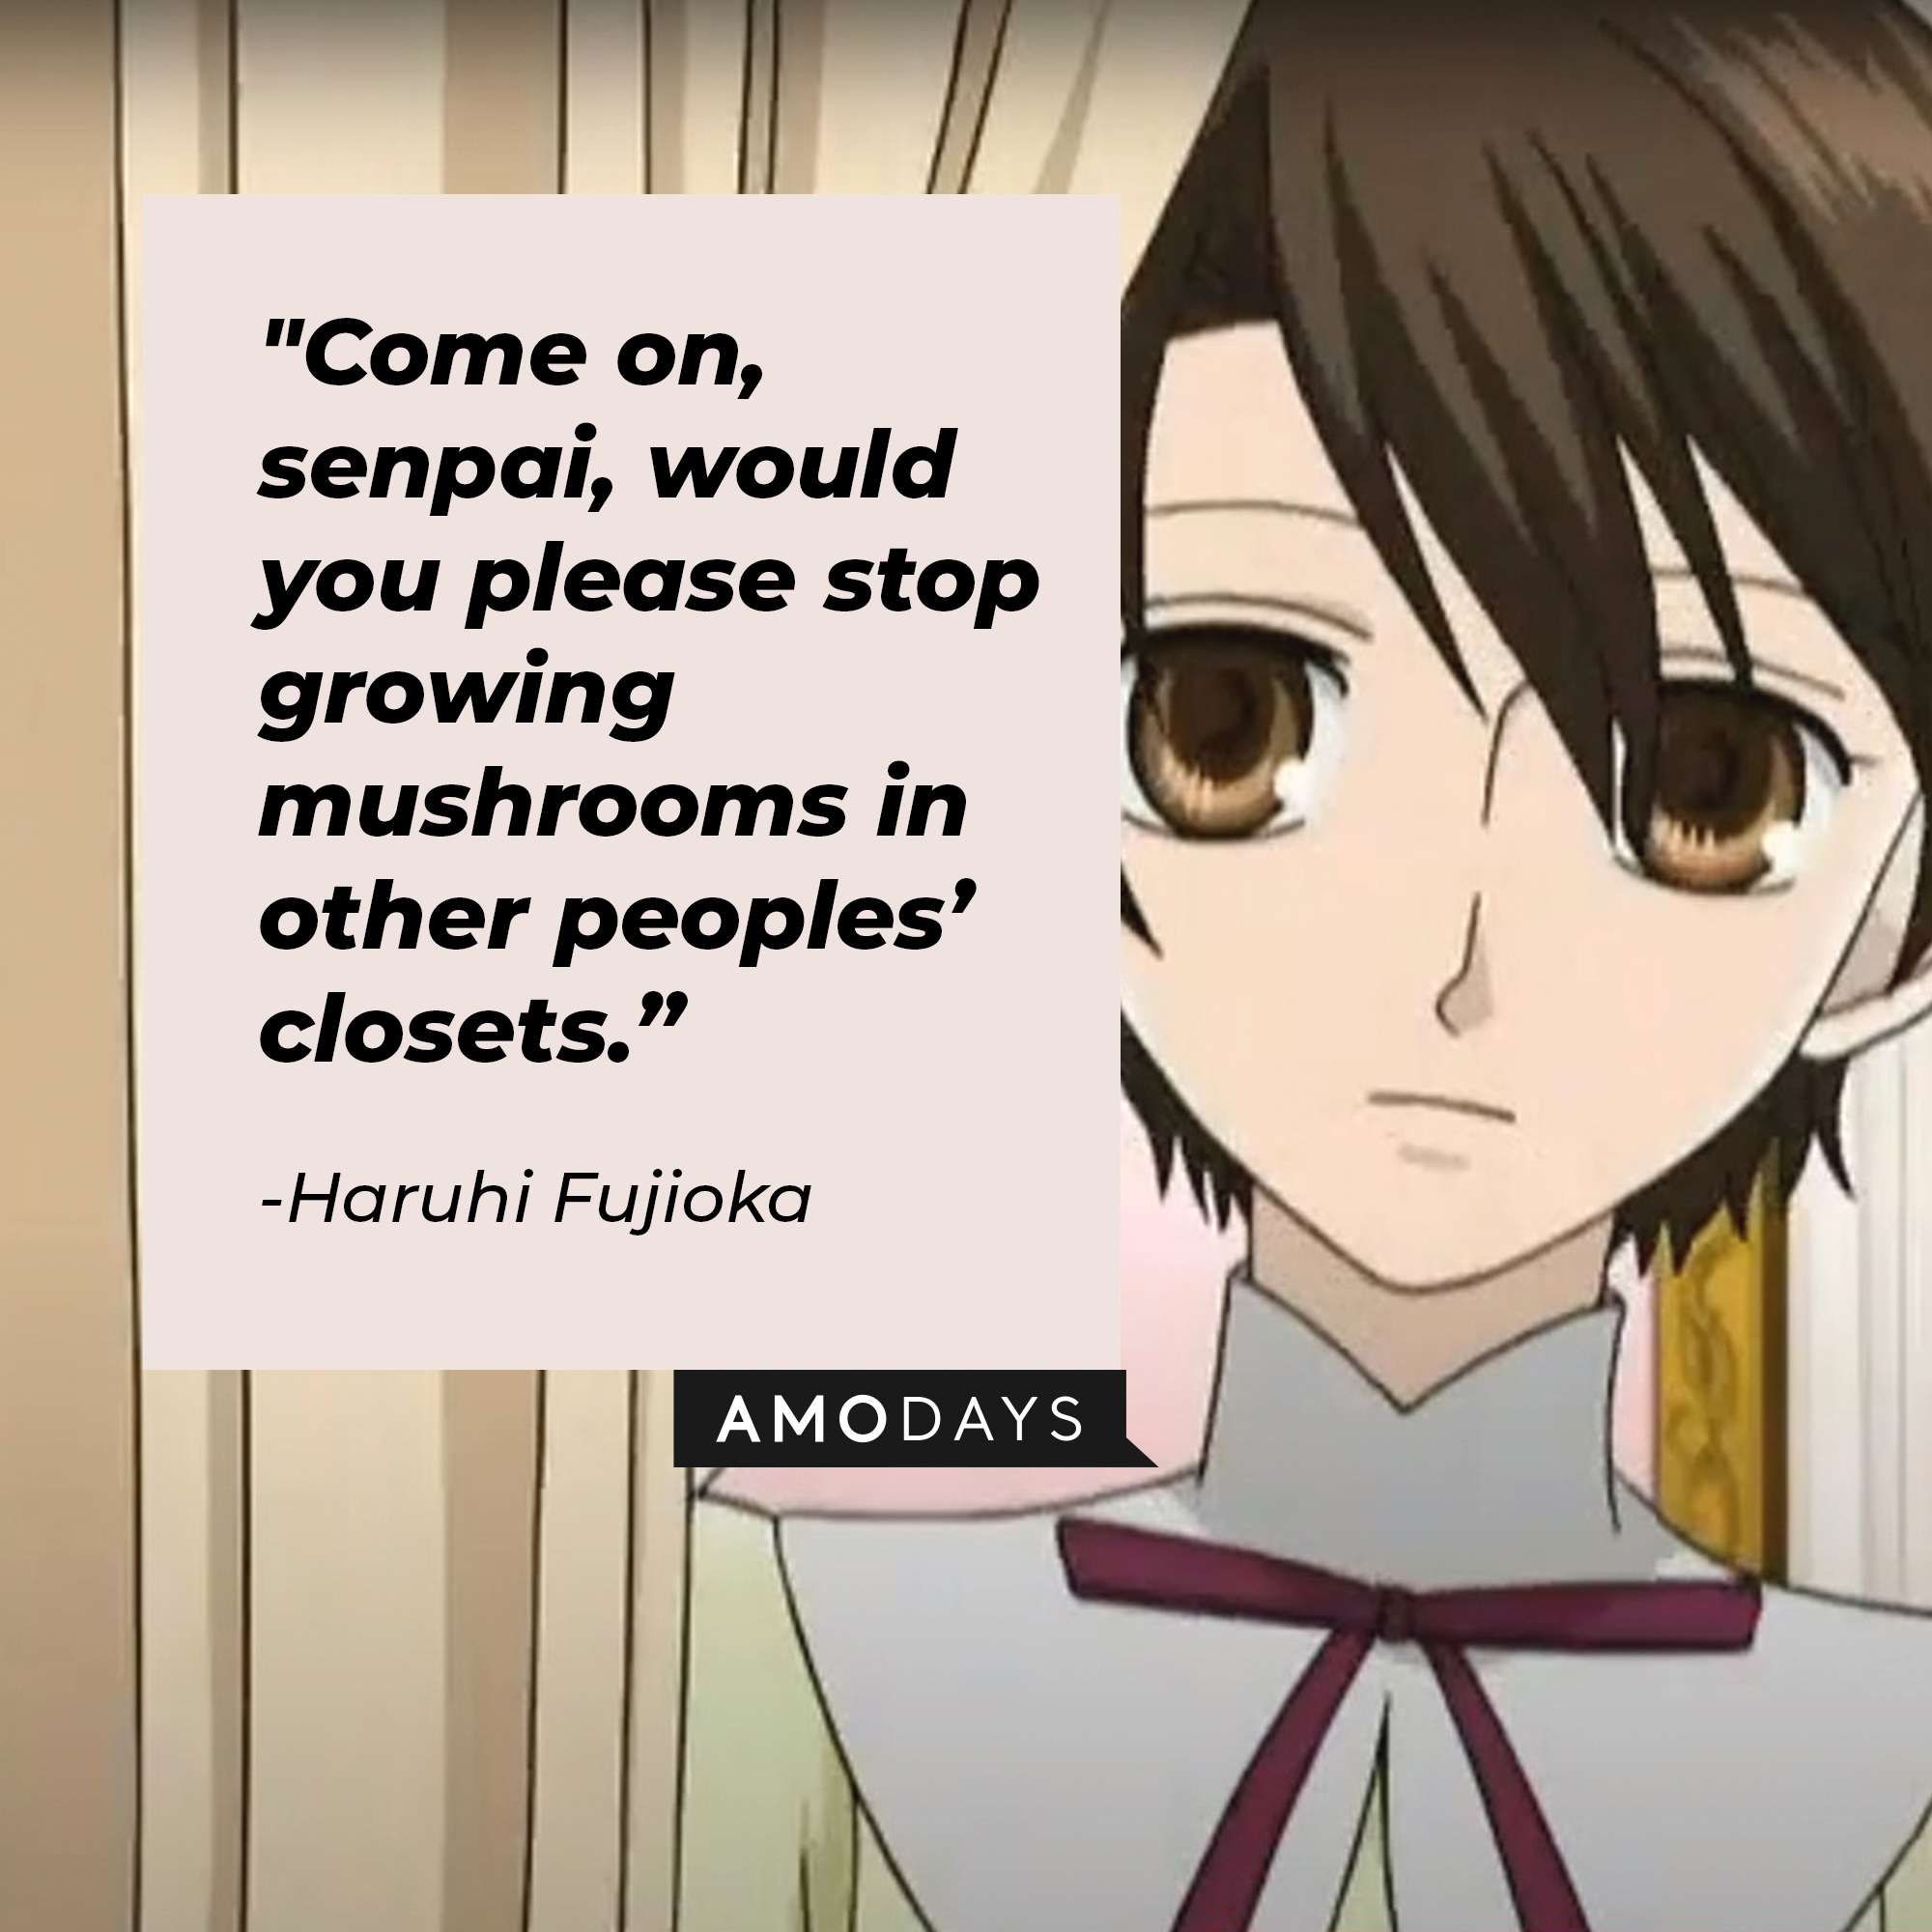 A picture of the anime character Haruhi Fujioka with a quote by her that reads, "Come on, senpai, would you  please stop growing mushrooms in other peoples’ closets.” | Image: facebook.com/theouranhostclub